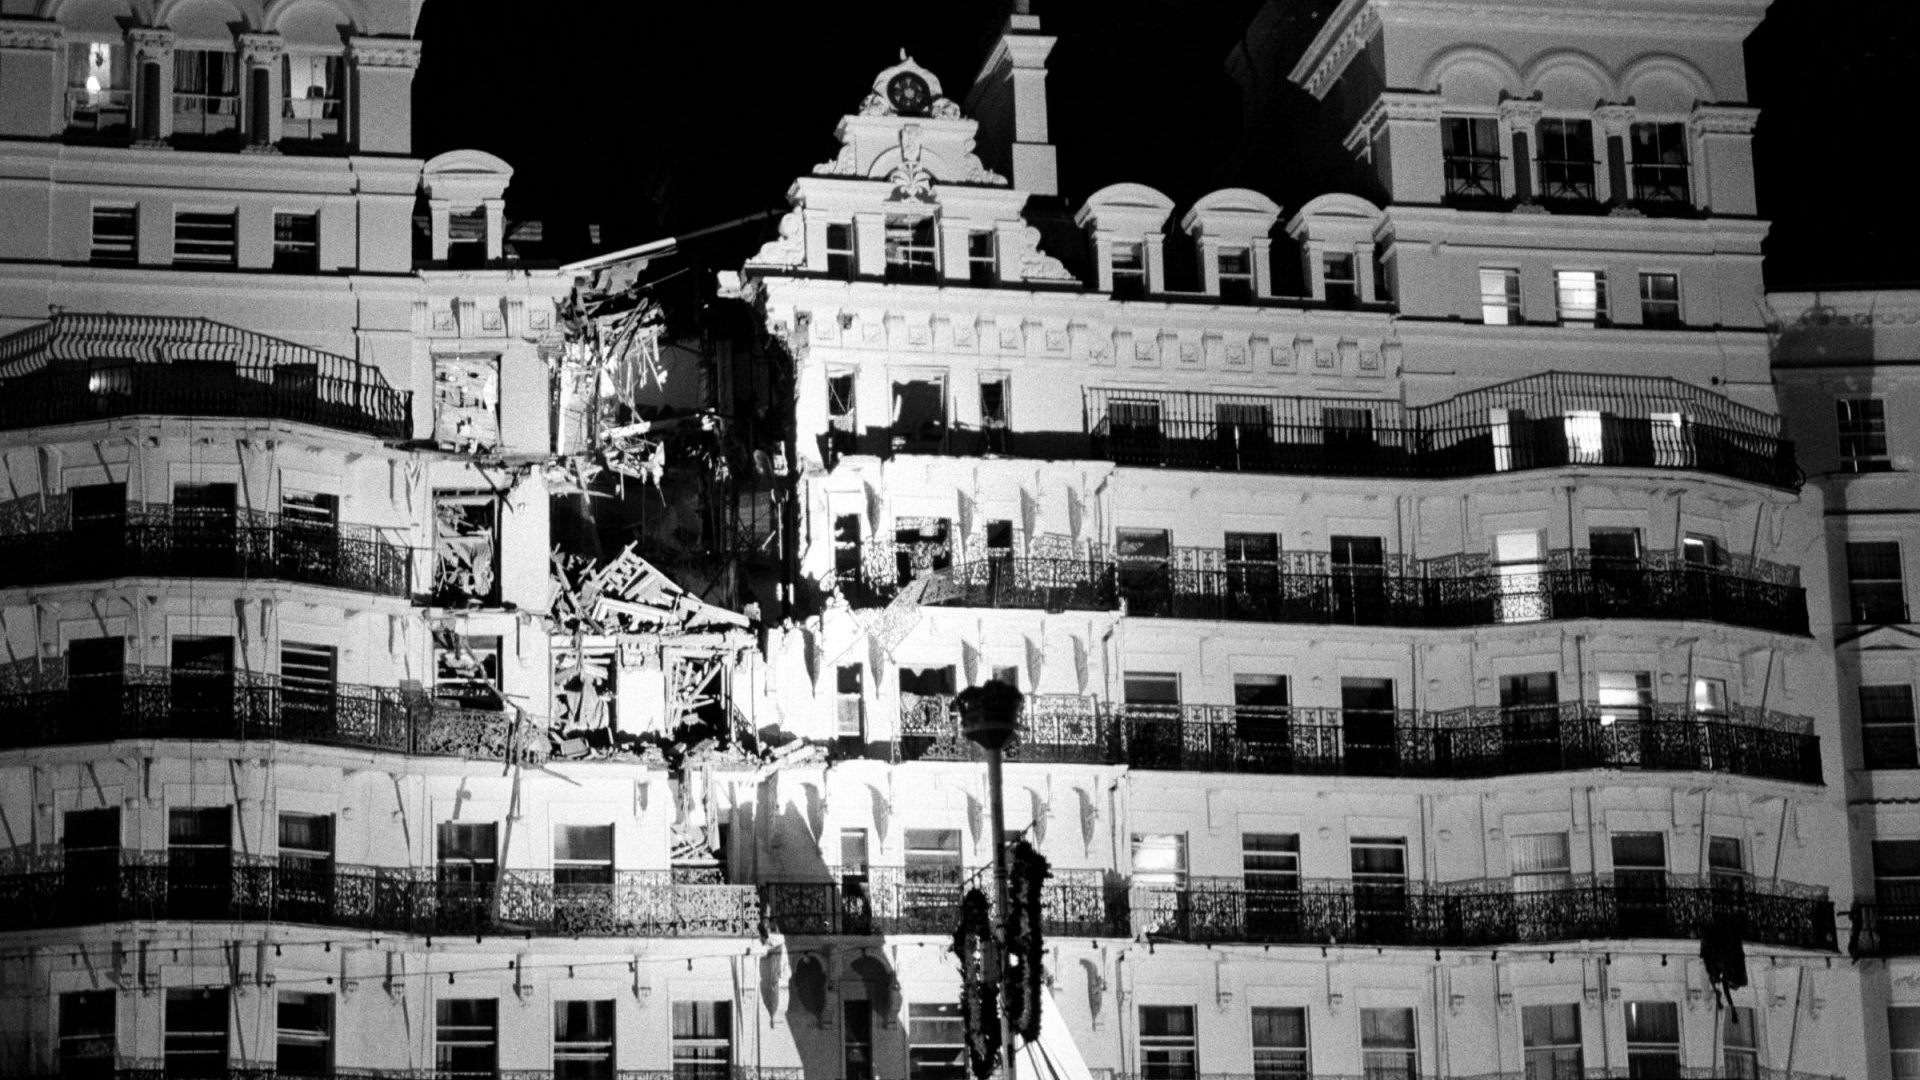 The Grand Hotel in Brighton after the 
IRA bomb attack on October 12 1984. 
Five people were killed, including the Conservative MP Sir Anthony Berry, and a further 31 were injured. Photo: John Downing/Hulton Archive/Getty